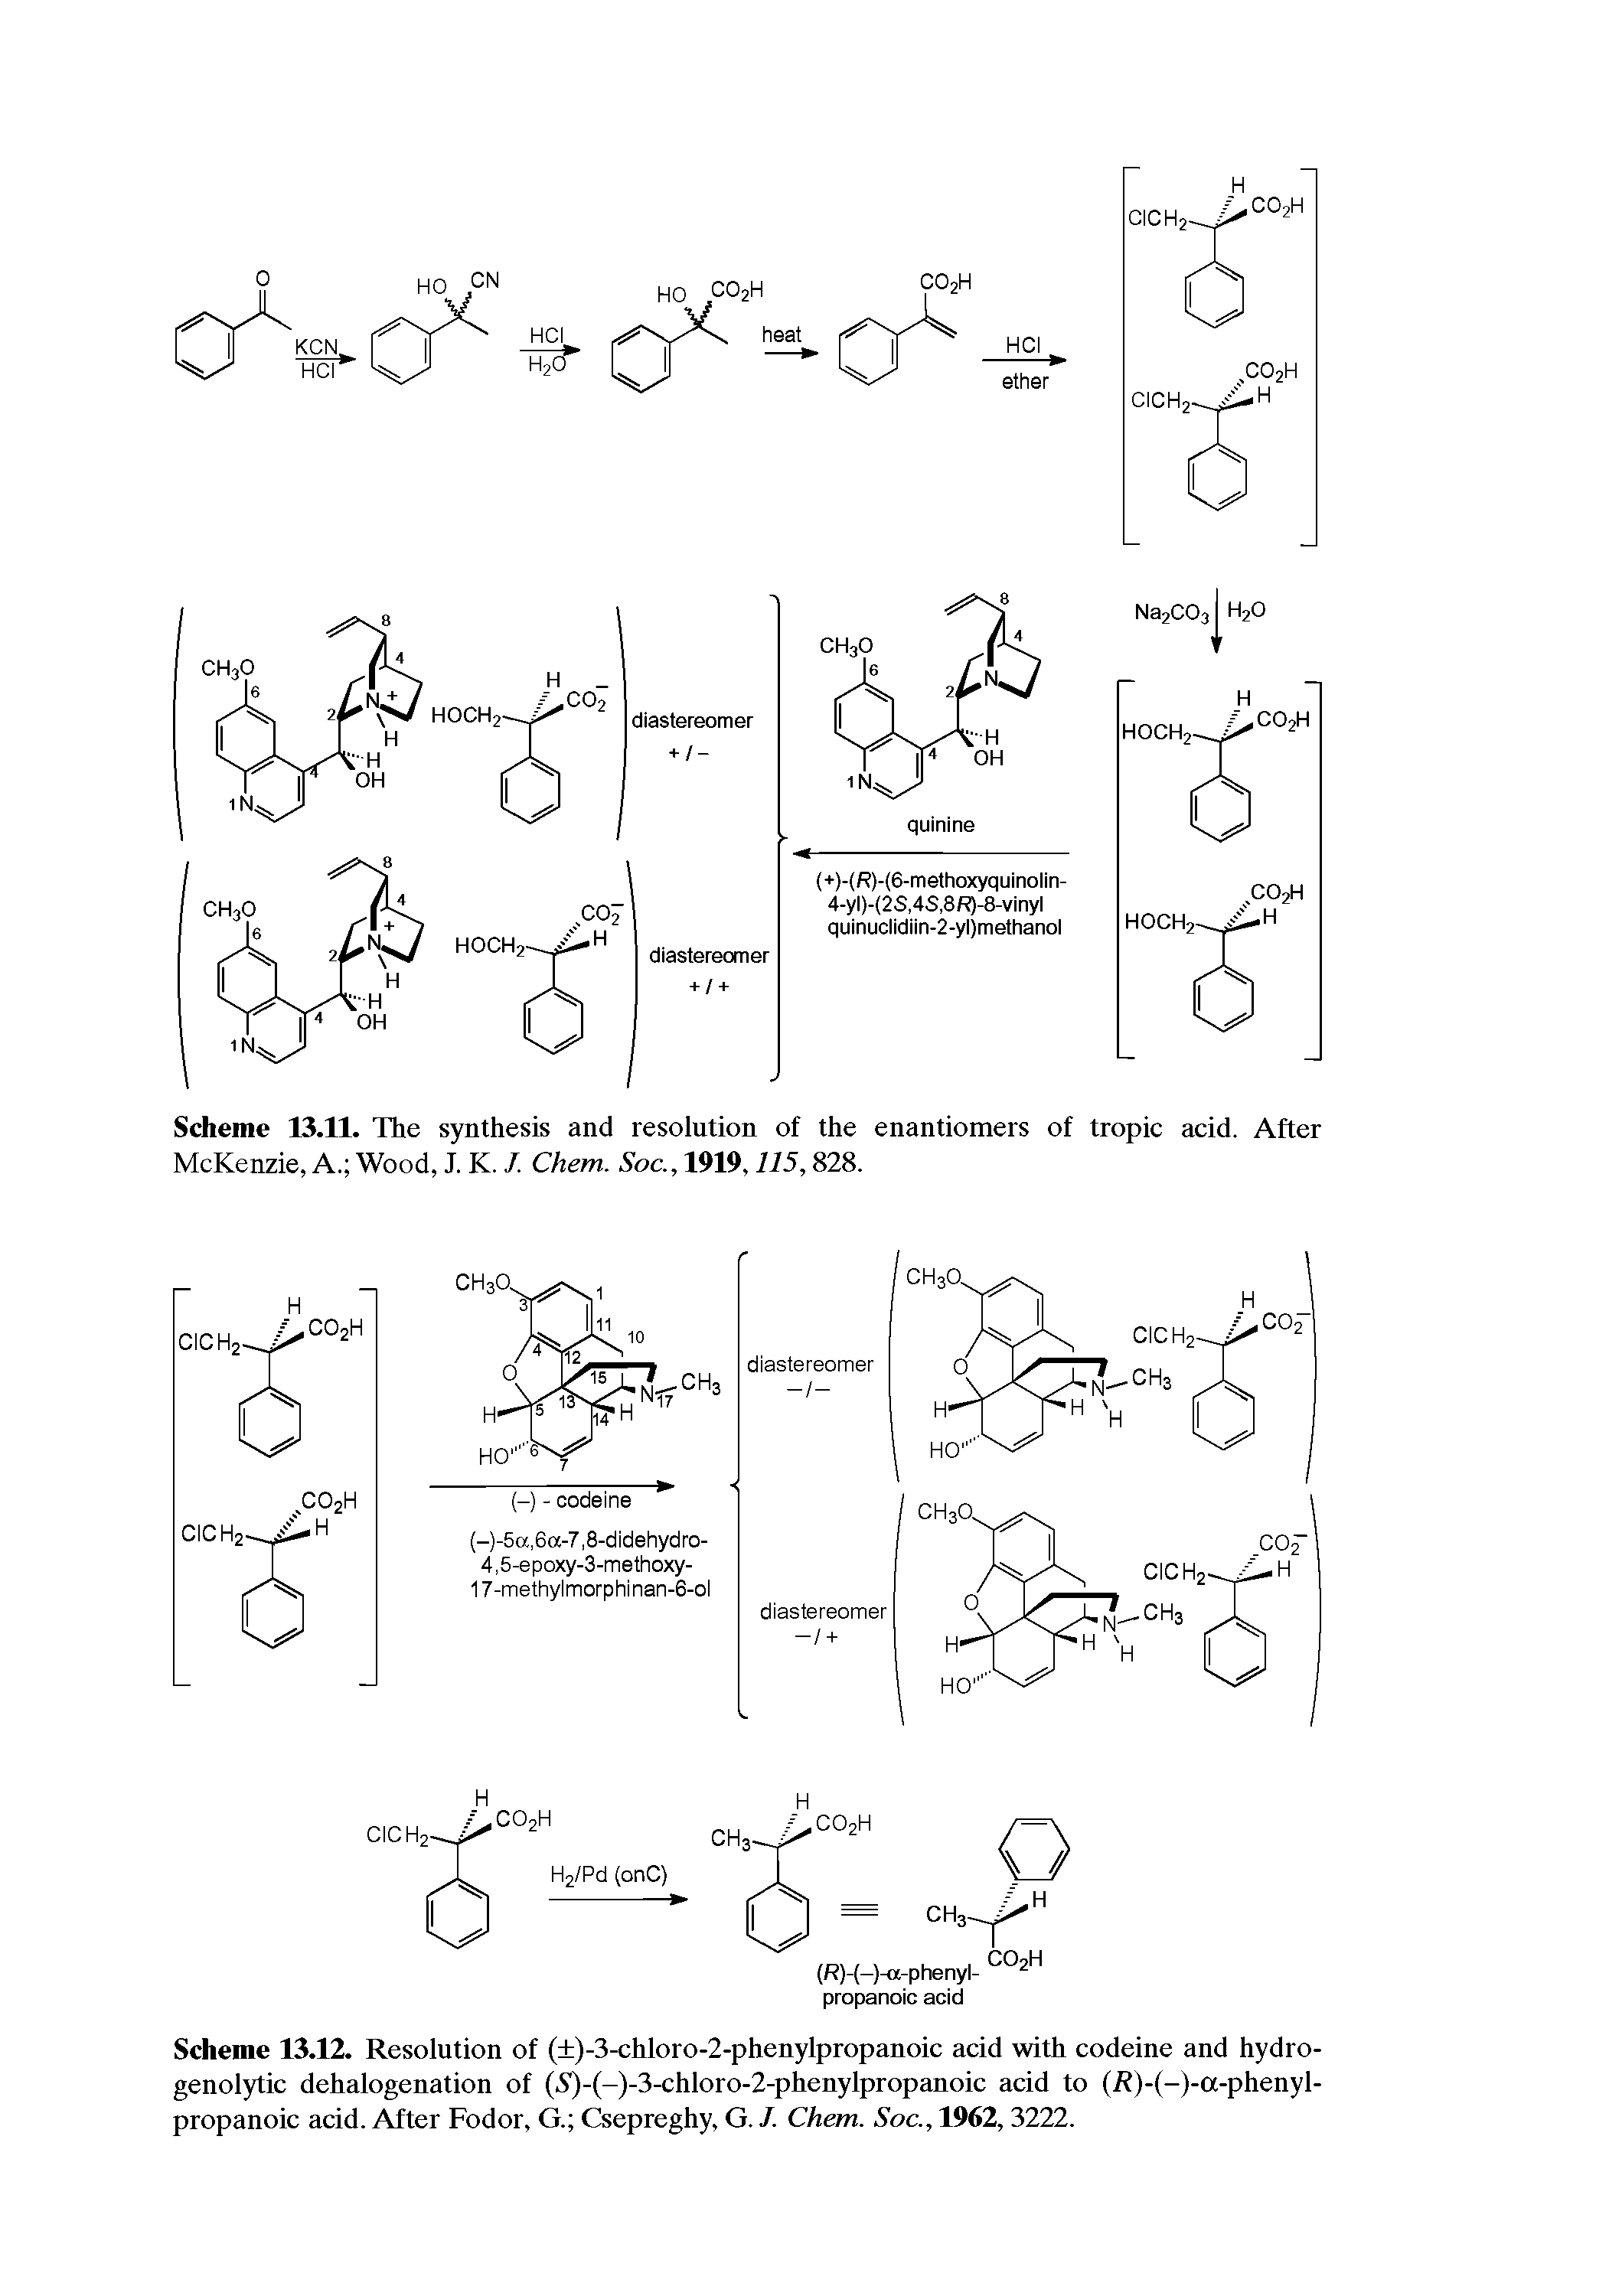 Scheme 13.11. The synthesis and resolution of the enantiomers of tropic acid. After McKenzie, A. Wood, J. K. /. Chem. Soc., 1919,115,828.